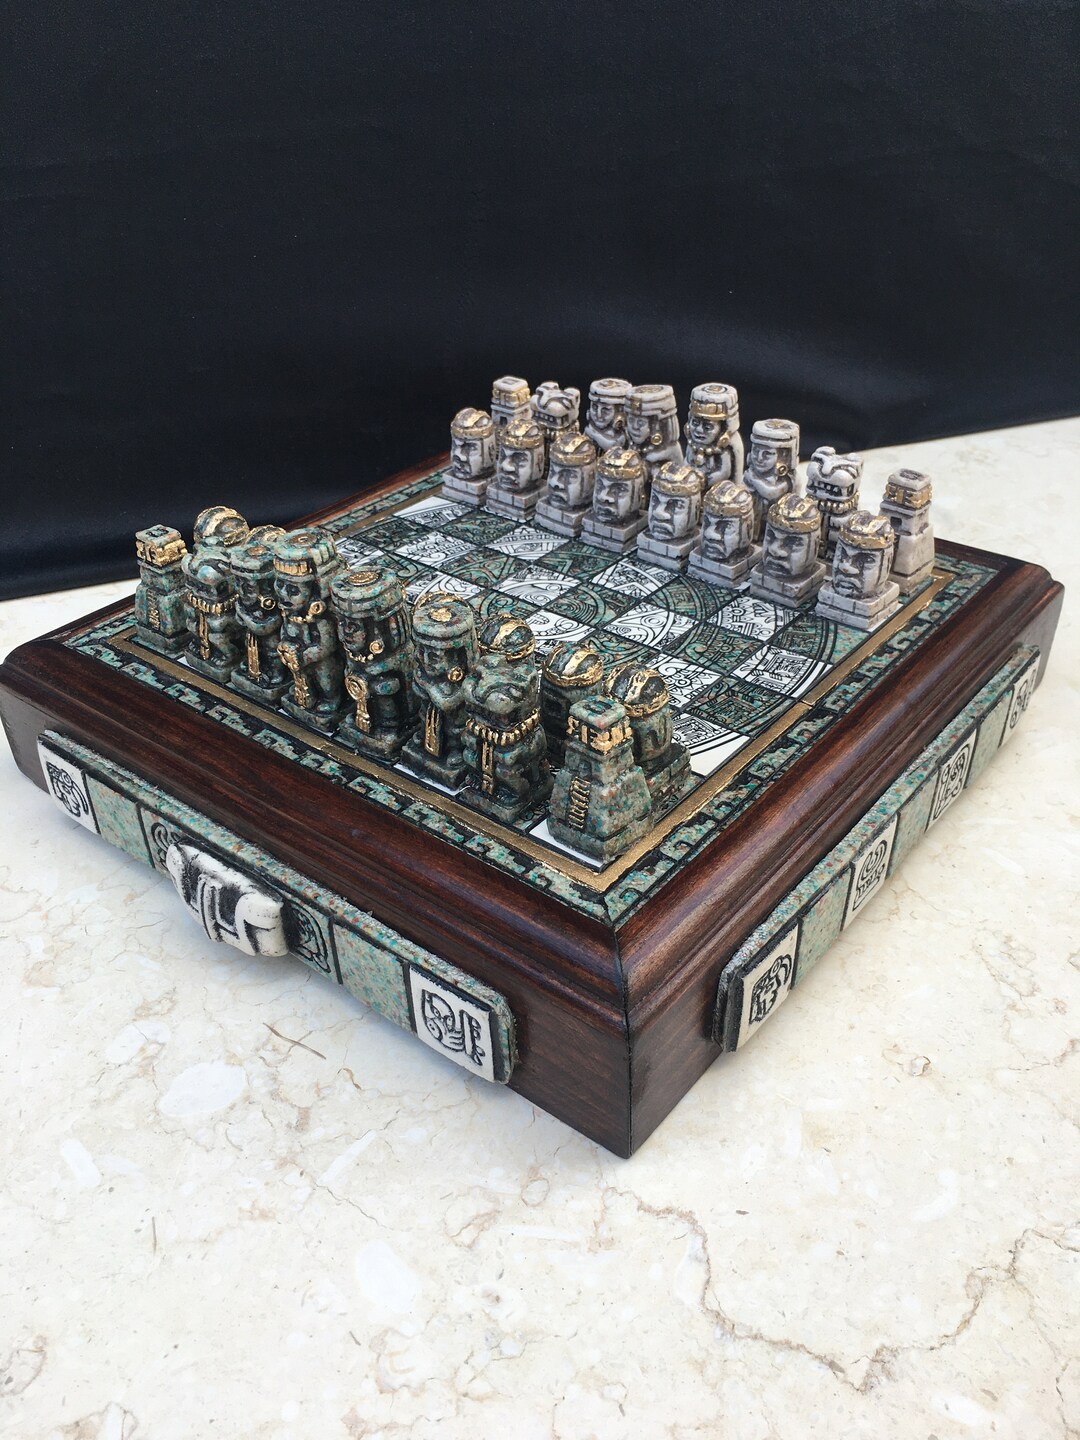 Handmade Chess Set Inspired by the Culture of Mexico - Etsy